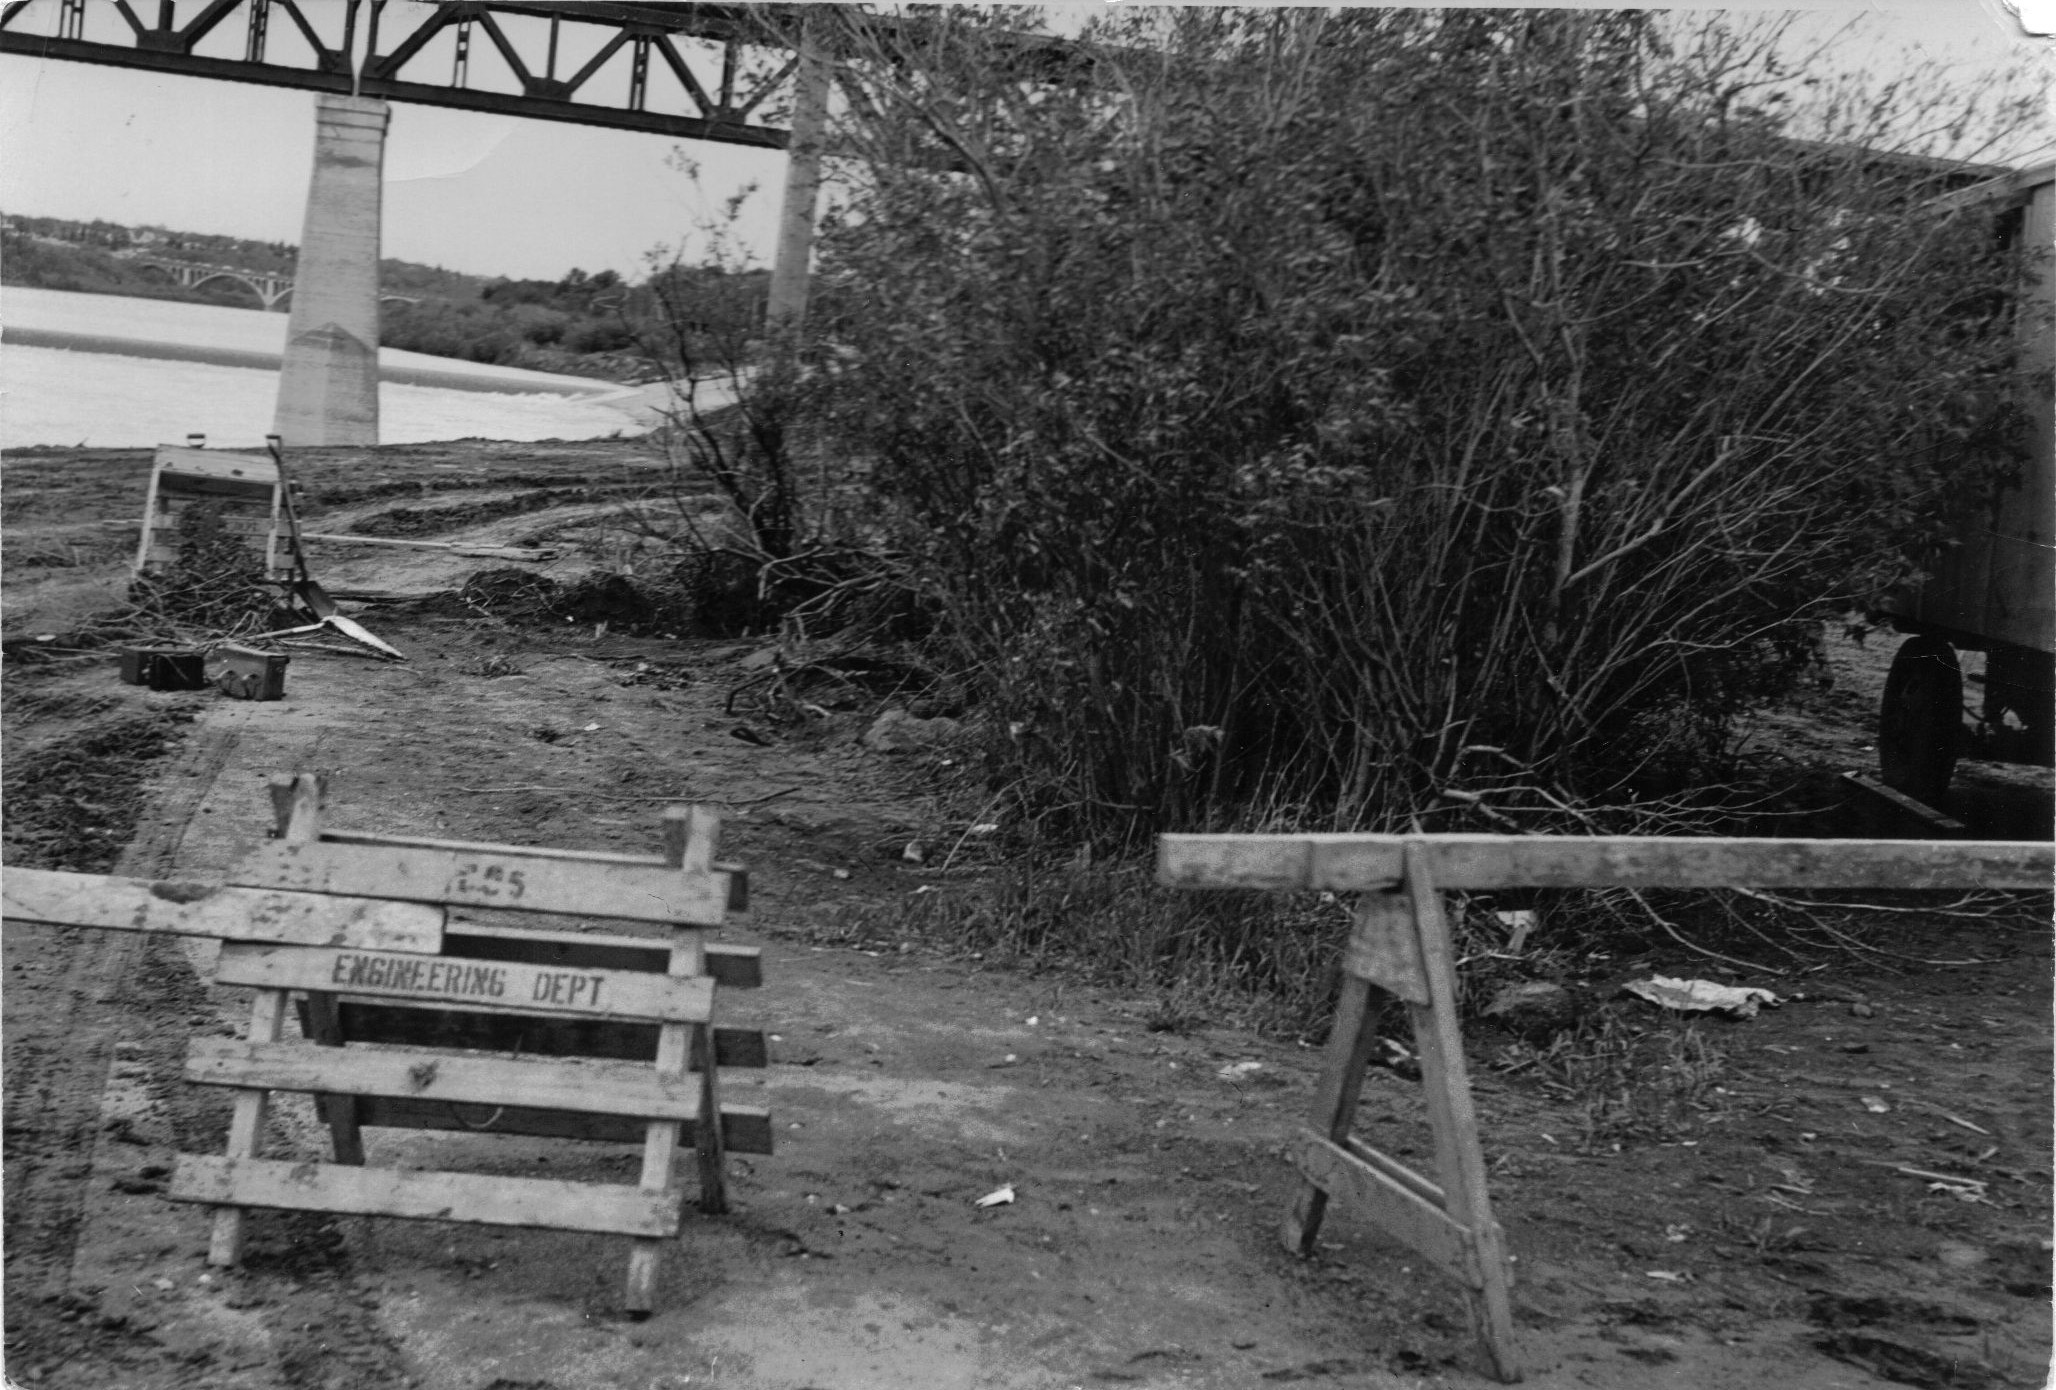 Crime scene, where she was found buried alive. This is a photo of the South Saskatchewan Riverbank where she was murdered.